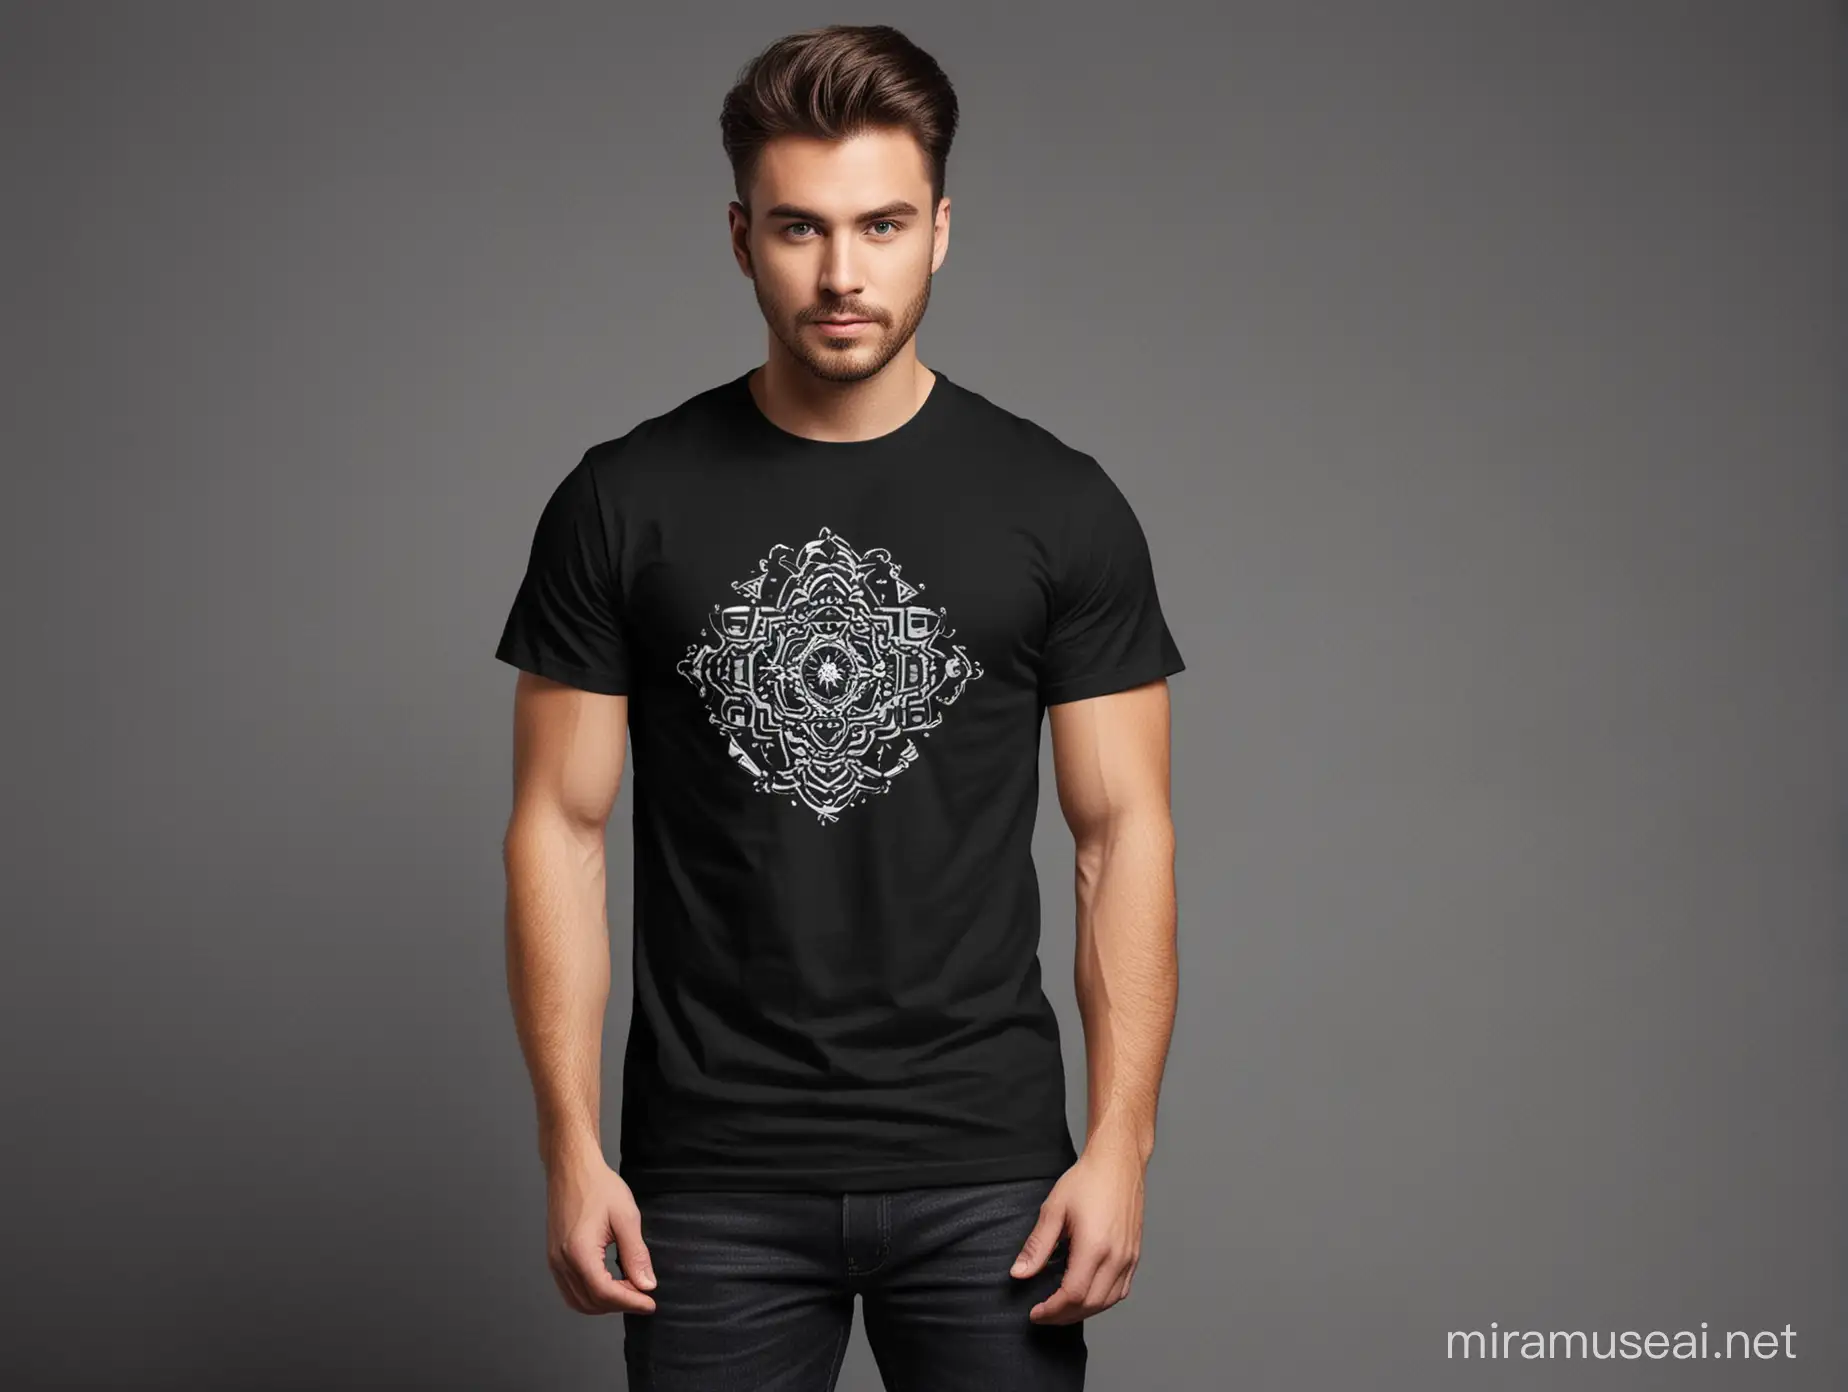 create a black tshirt with a design printed on it